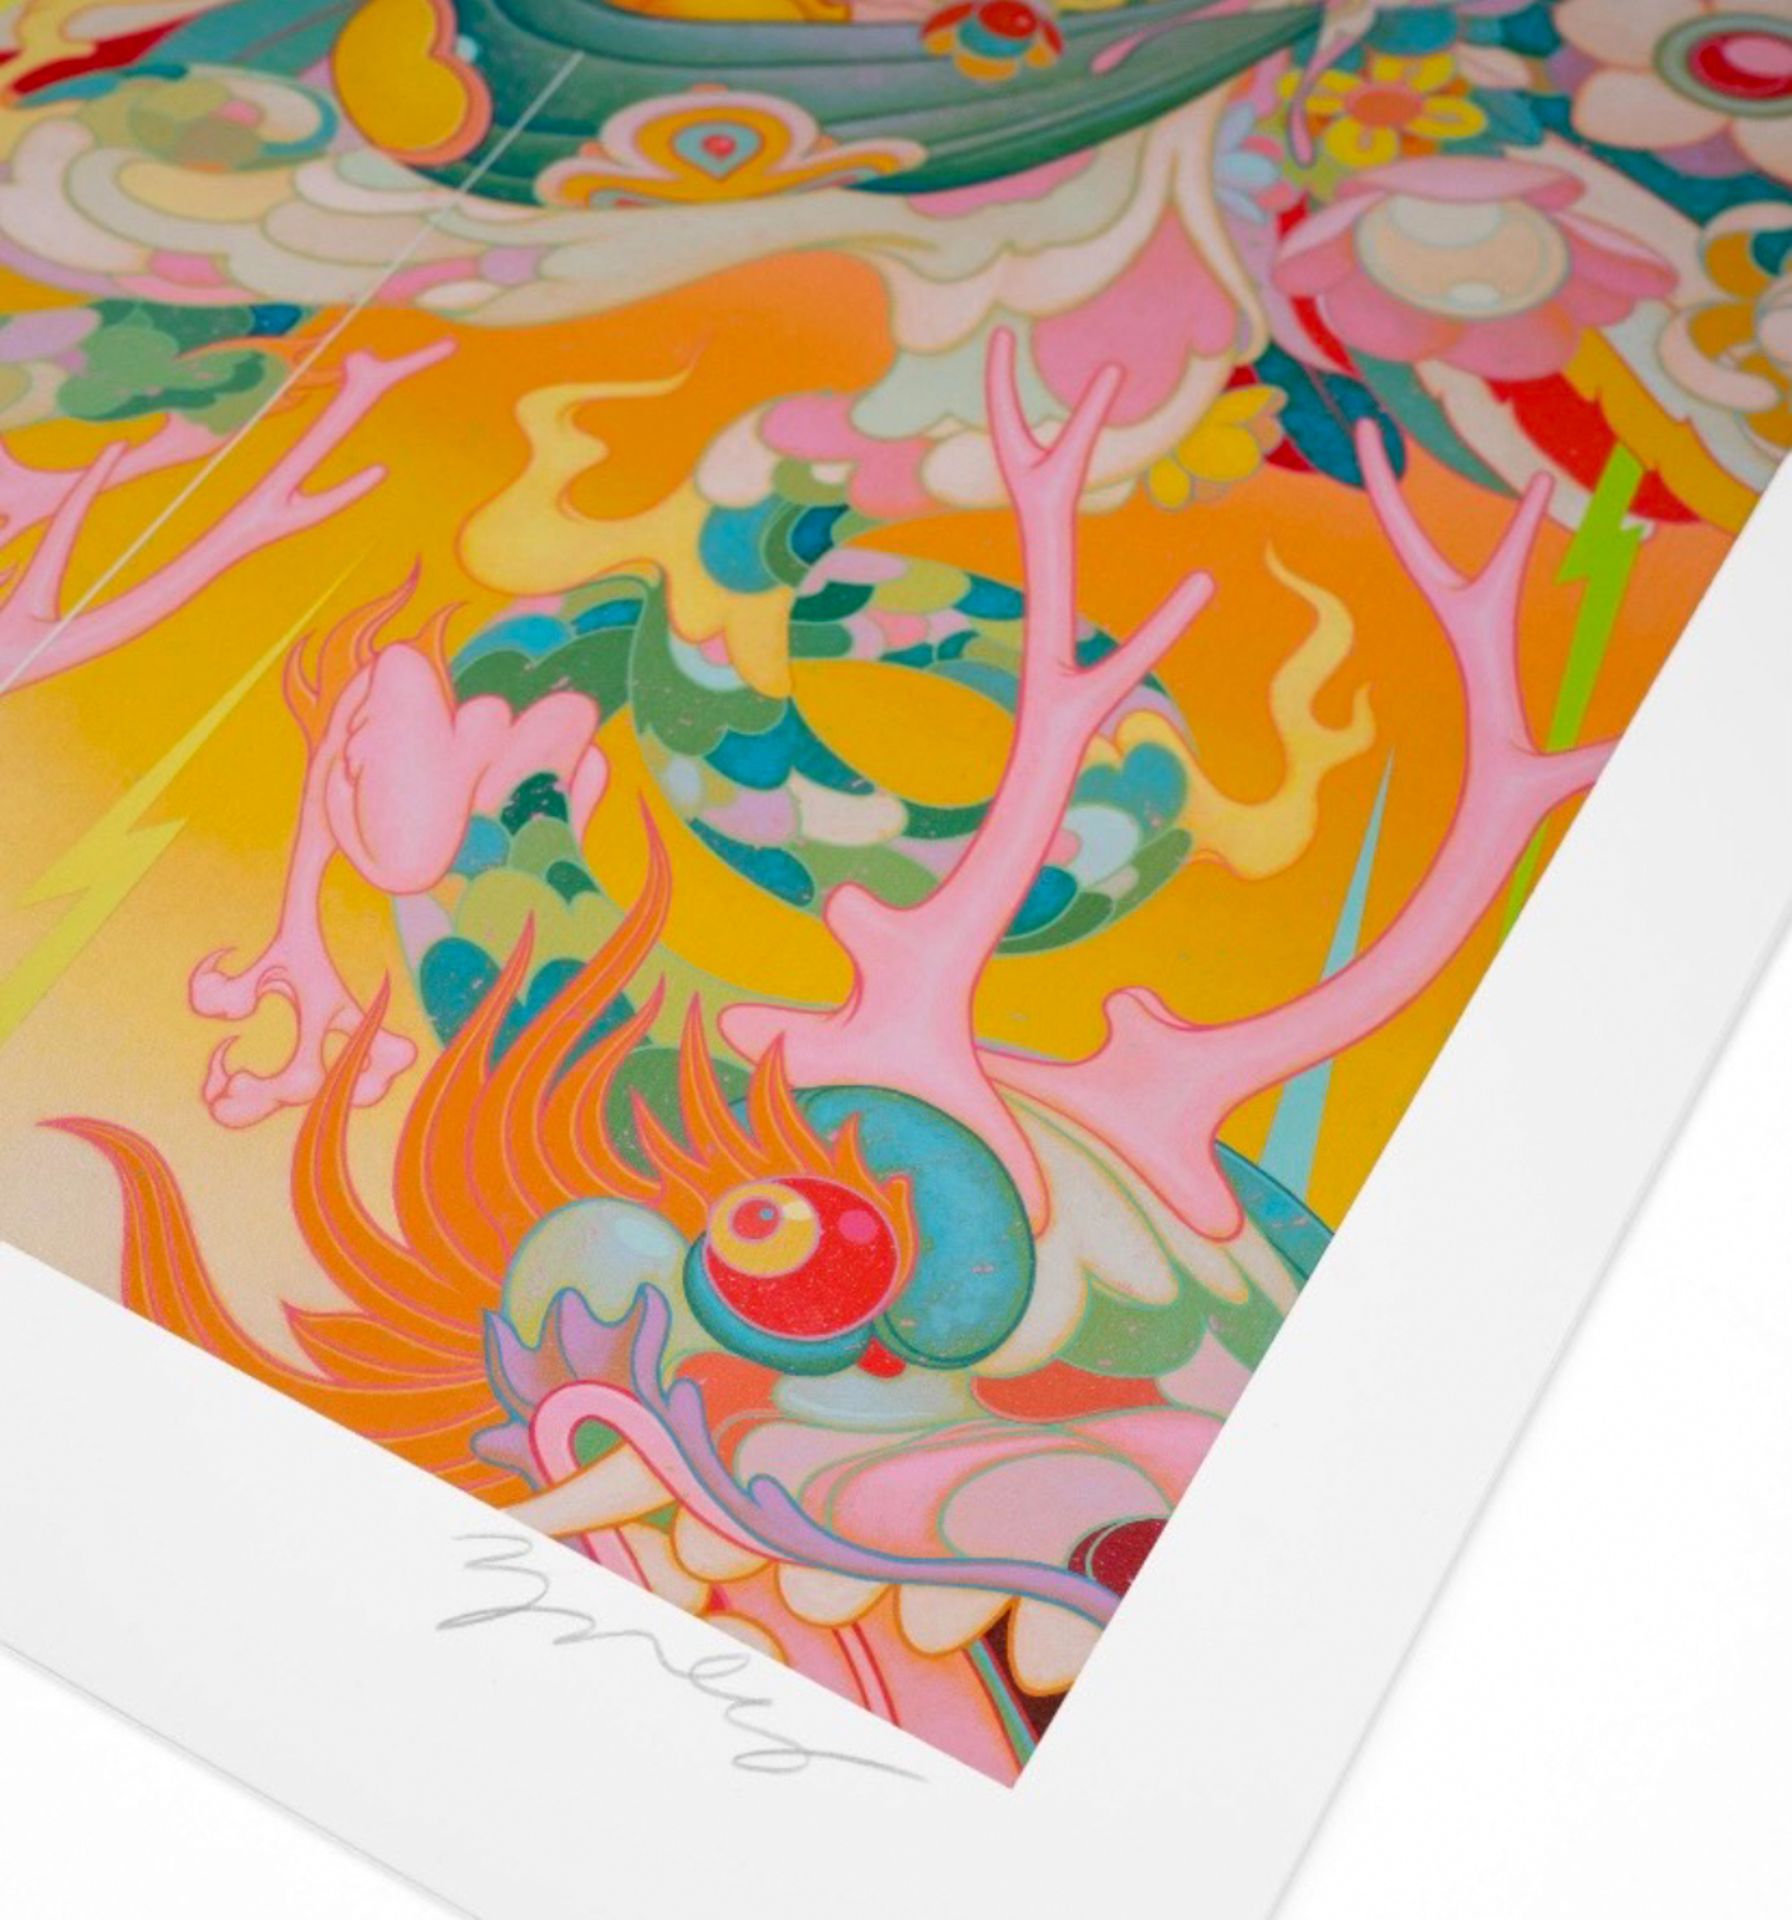 James Jean (B. 1979), Lithograph - Image 3 of 3